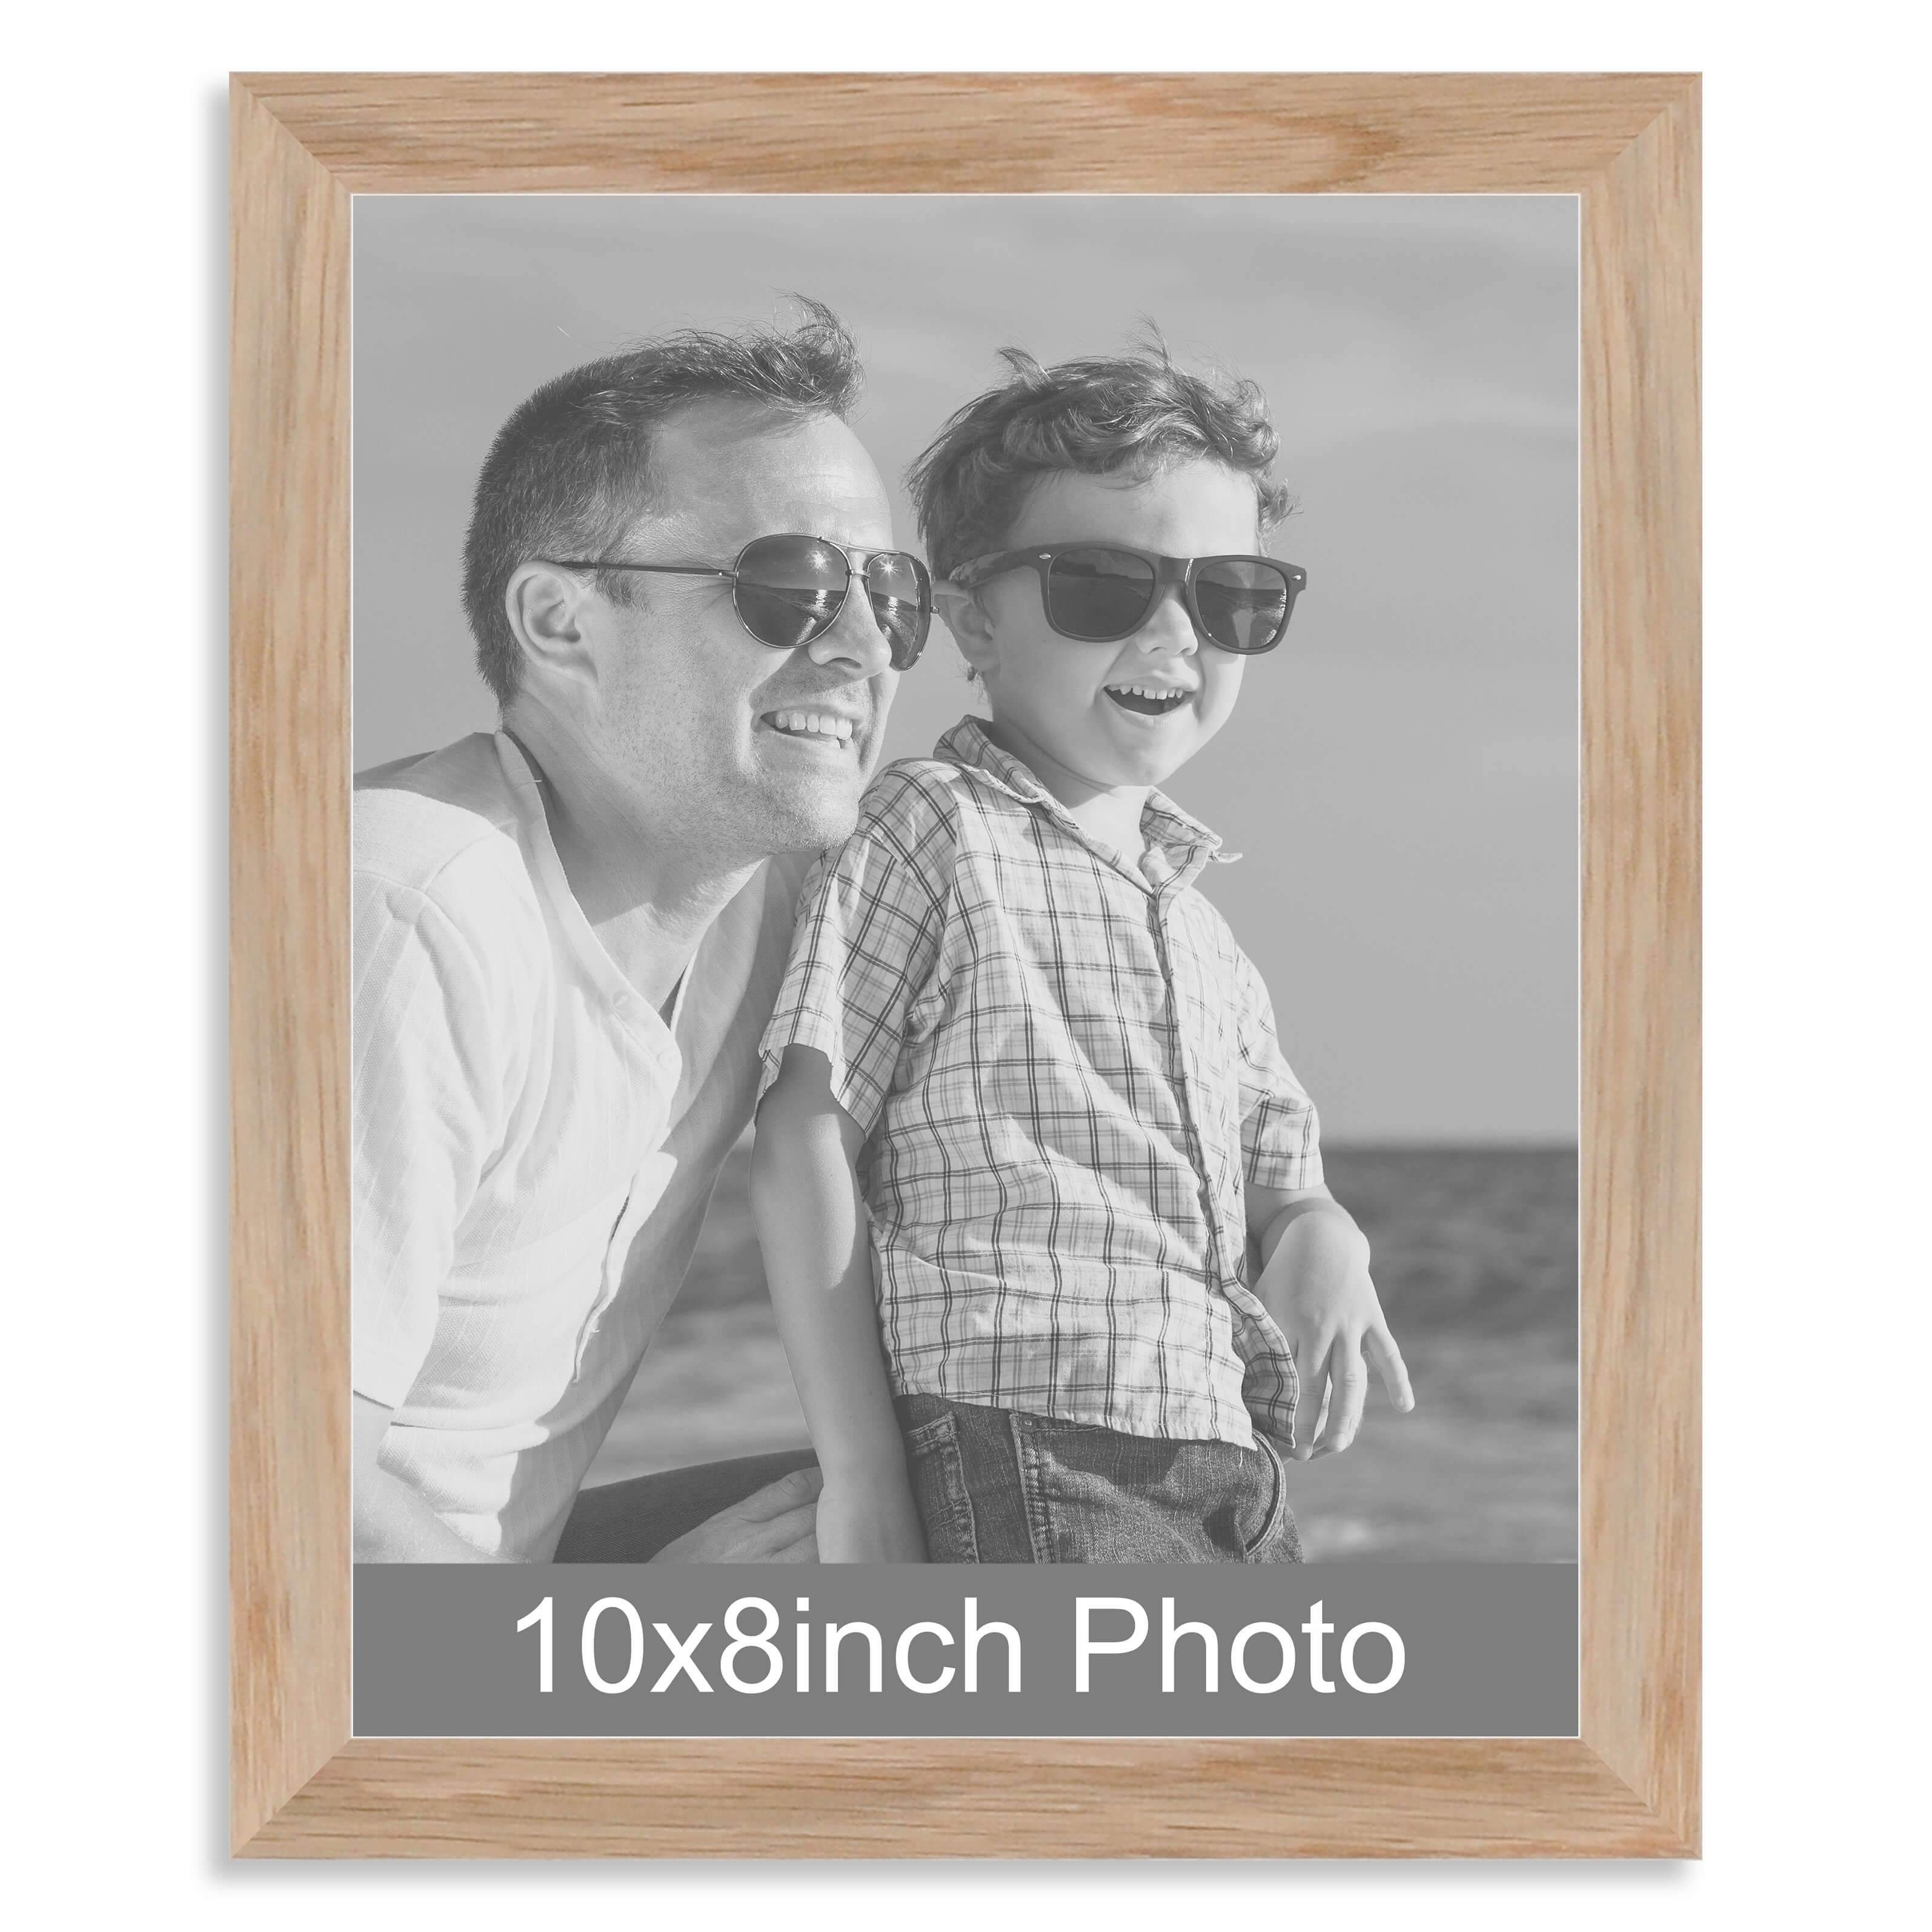 10 x 8inch Solid Oak Photo Frame for a 10×8/8x10in image – Photo Not Required